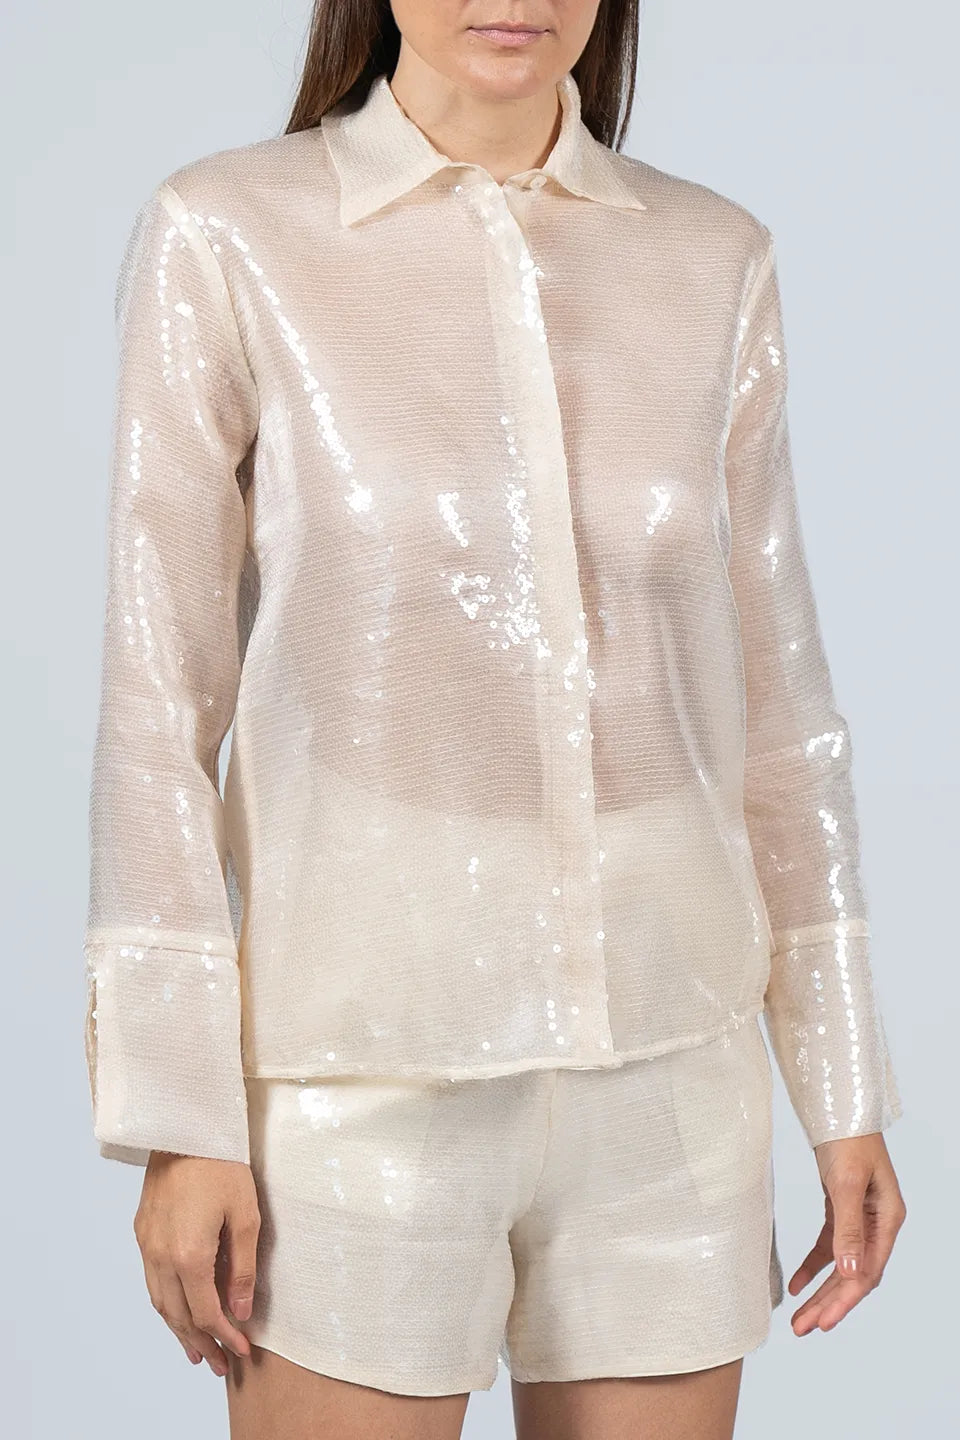 Shop online trendy Beige Shirt from Federica Tosi Fashion designer. Product gallery 1